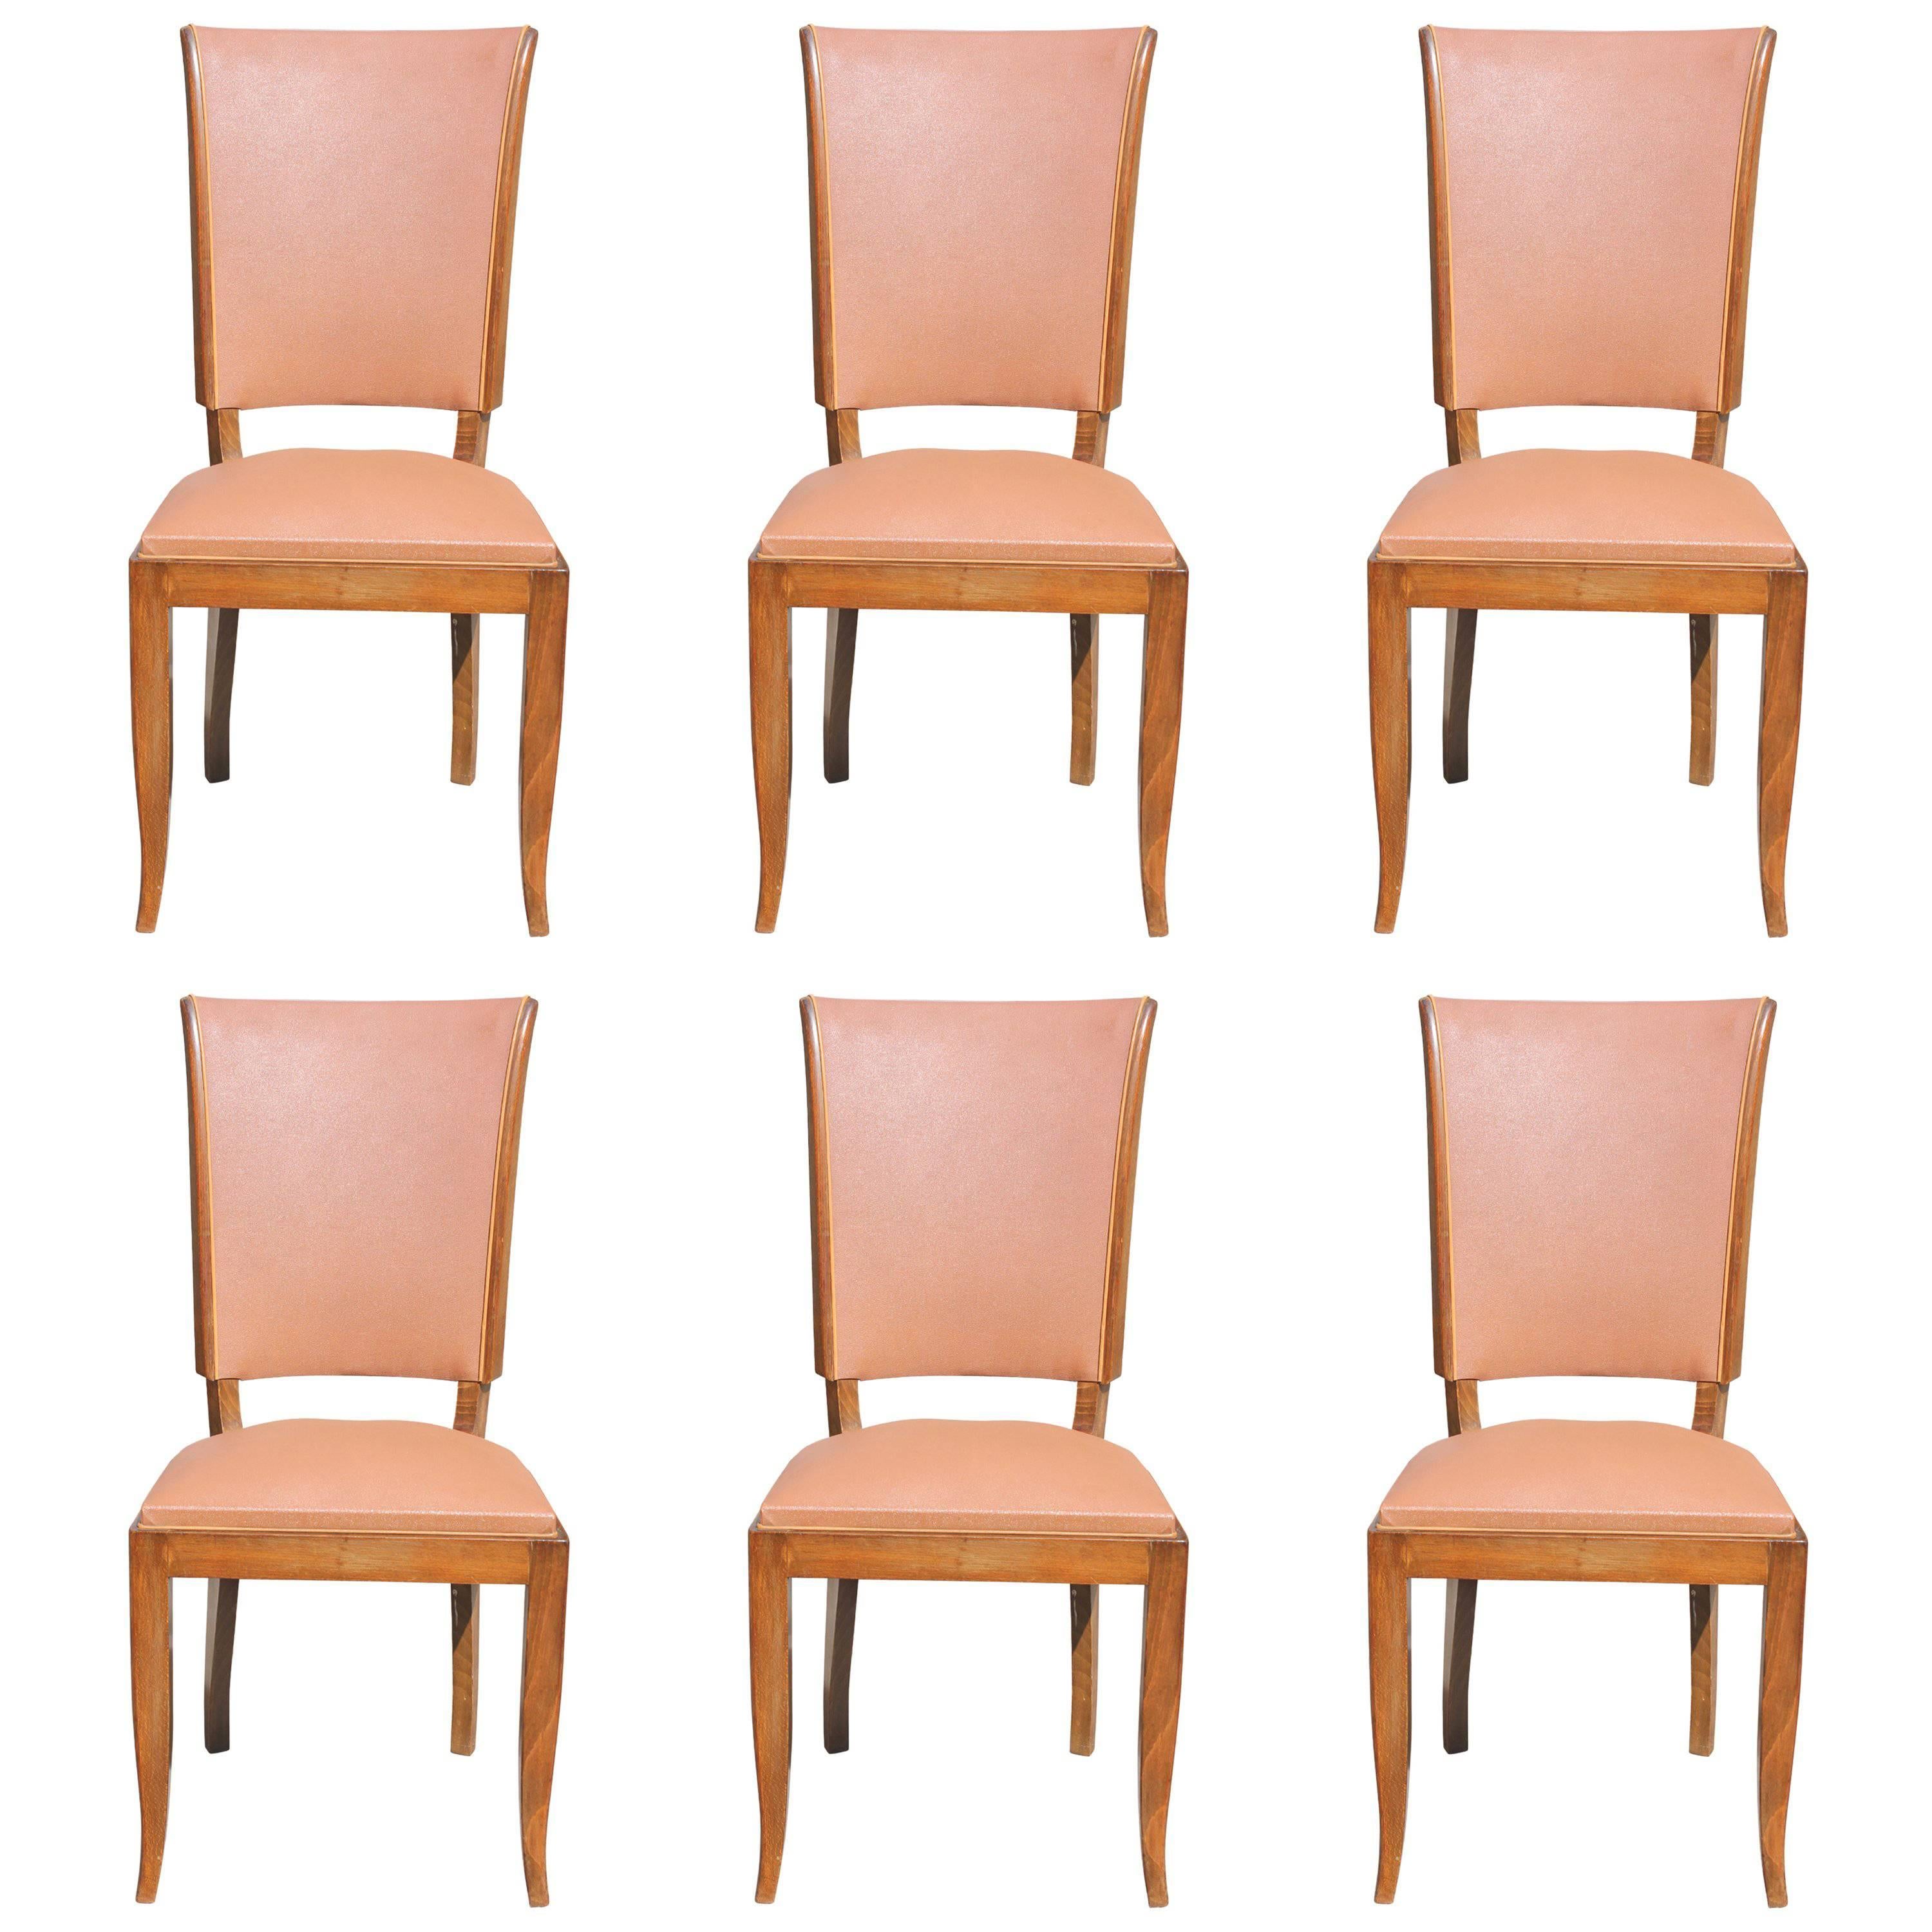 Suite of Six French Art Deco Classic Mahogany Dining Chairs, circa 1940s